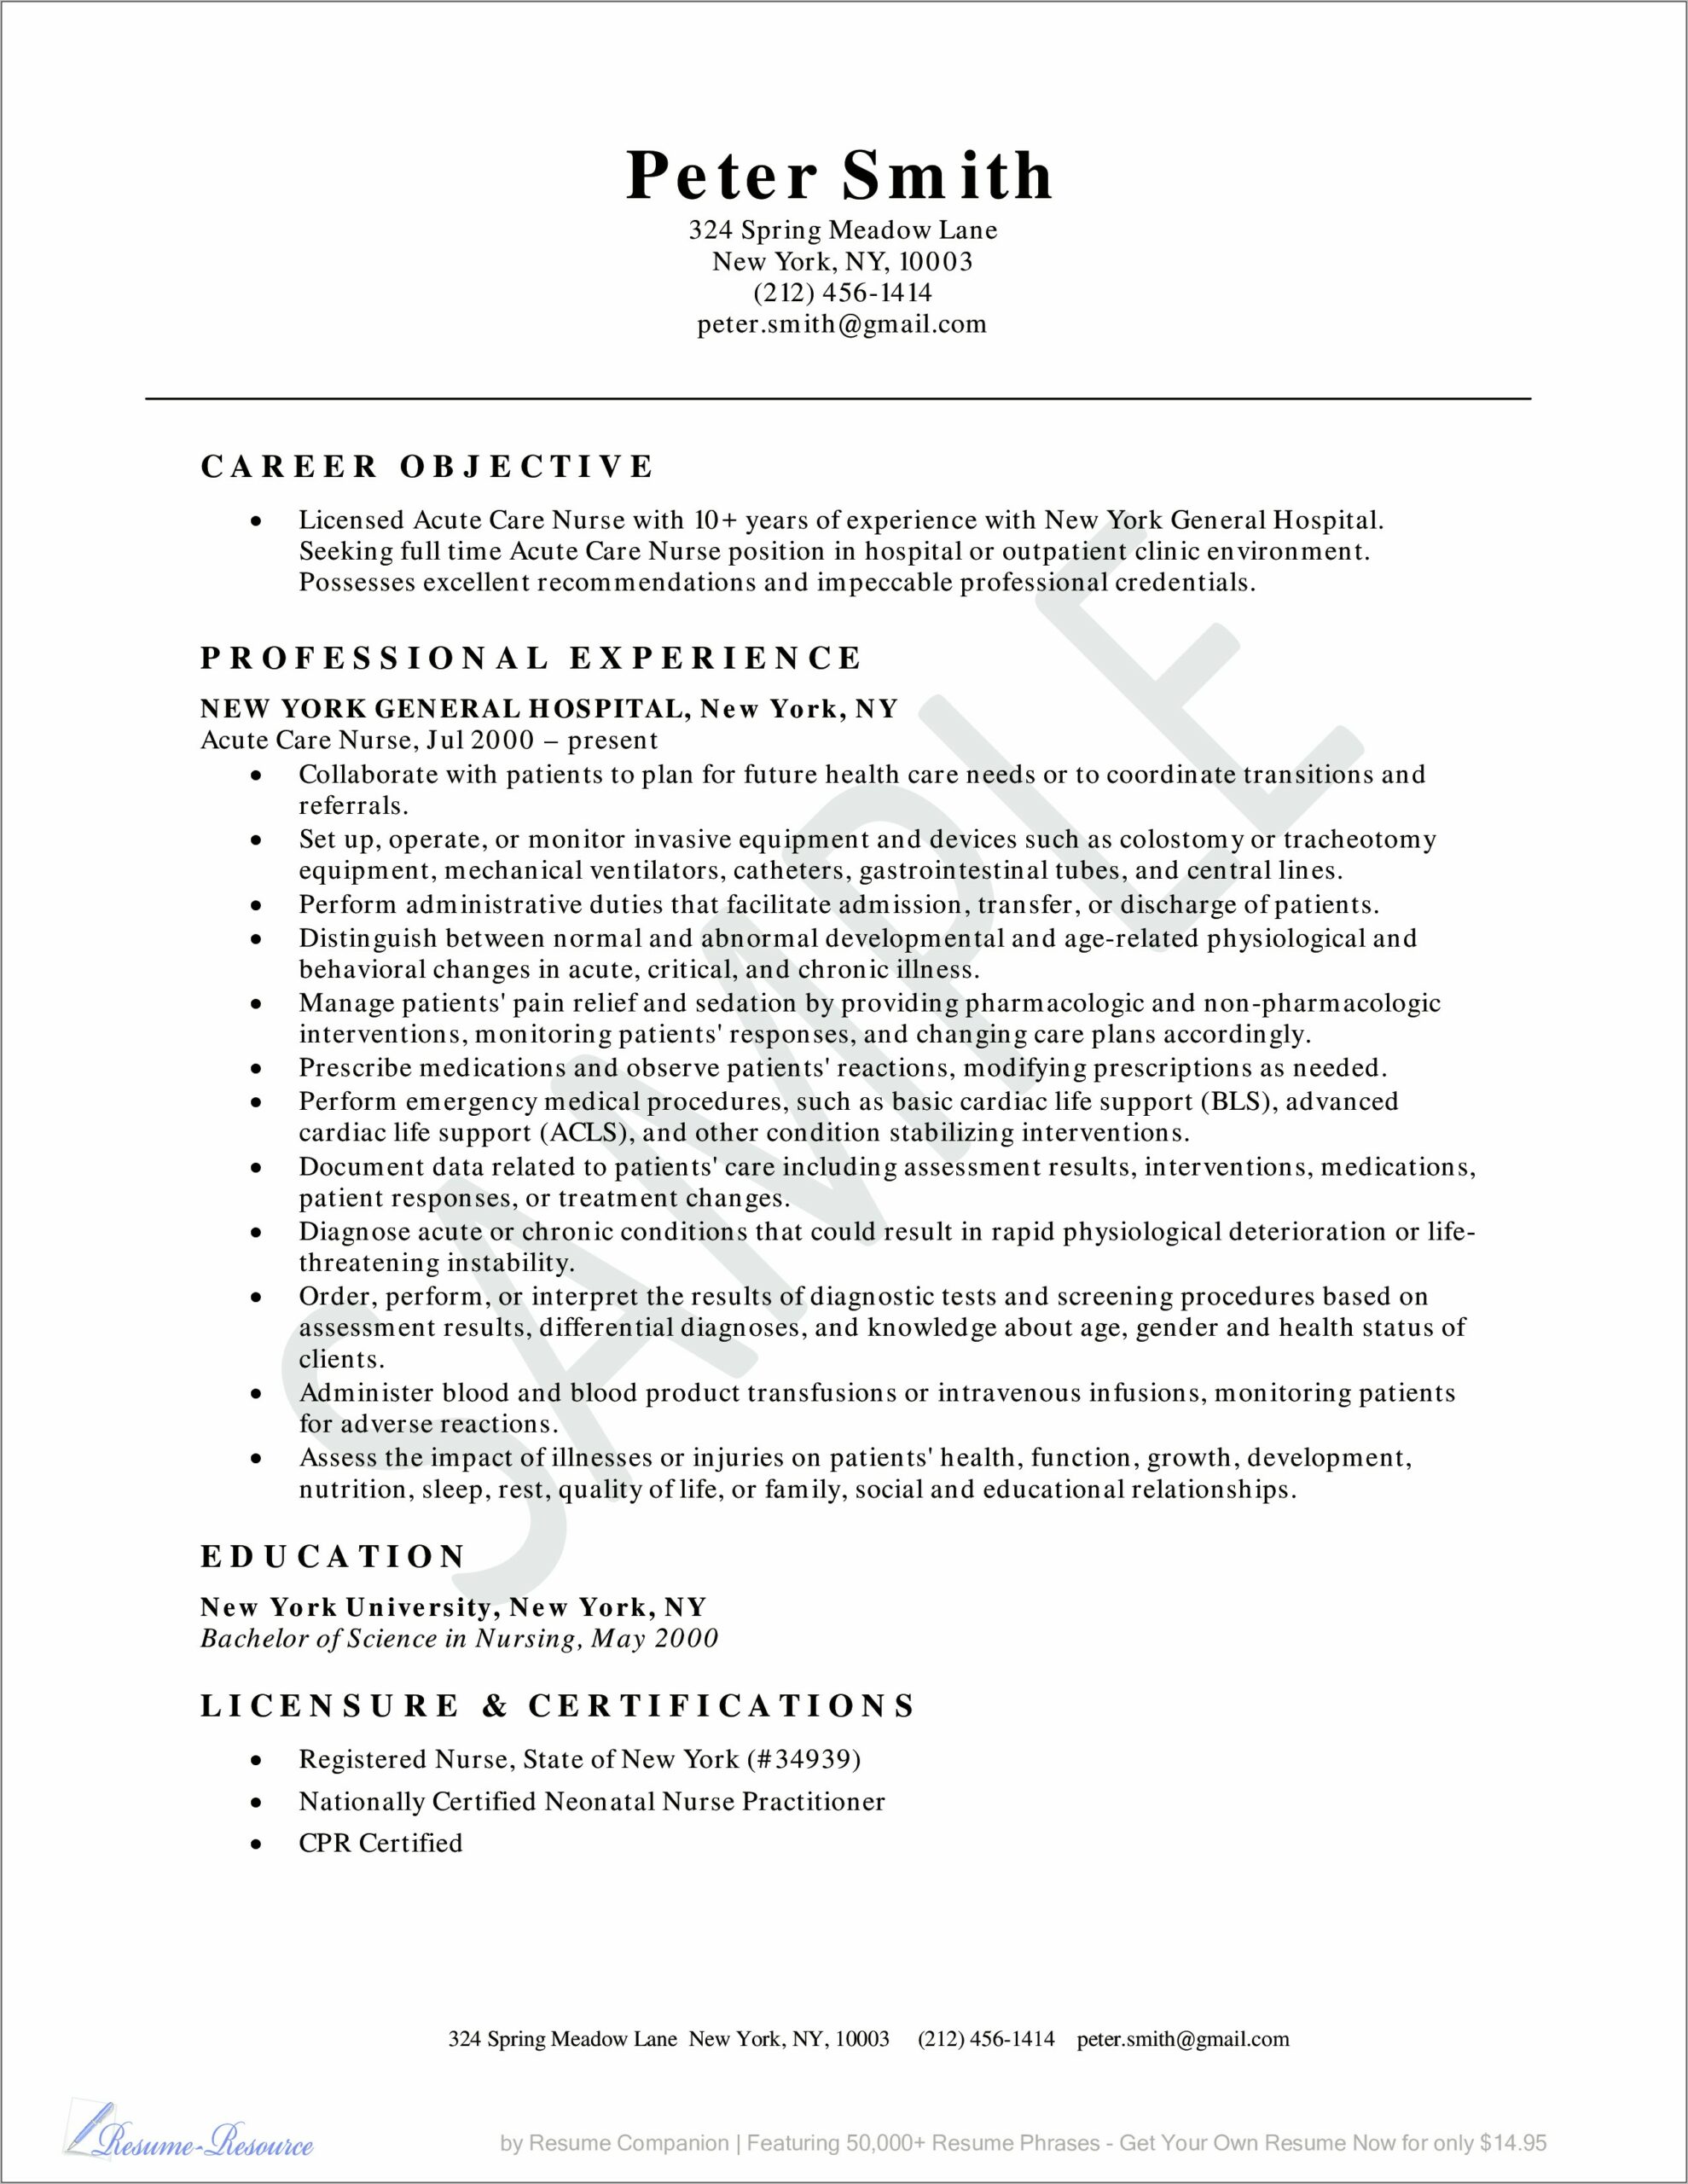 Resume Objective For Healthcare Position